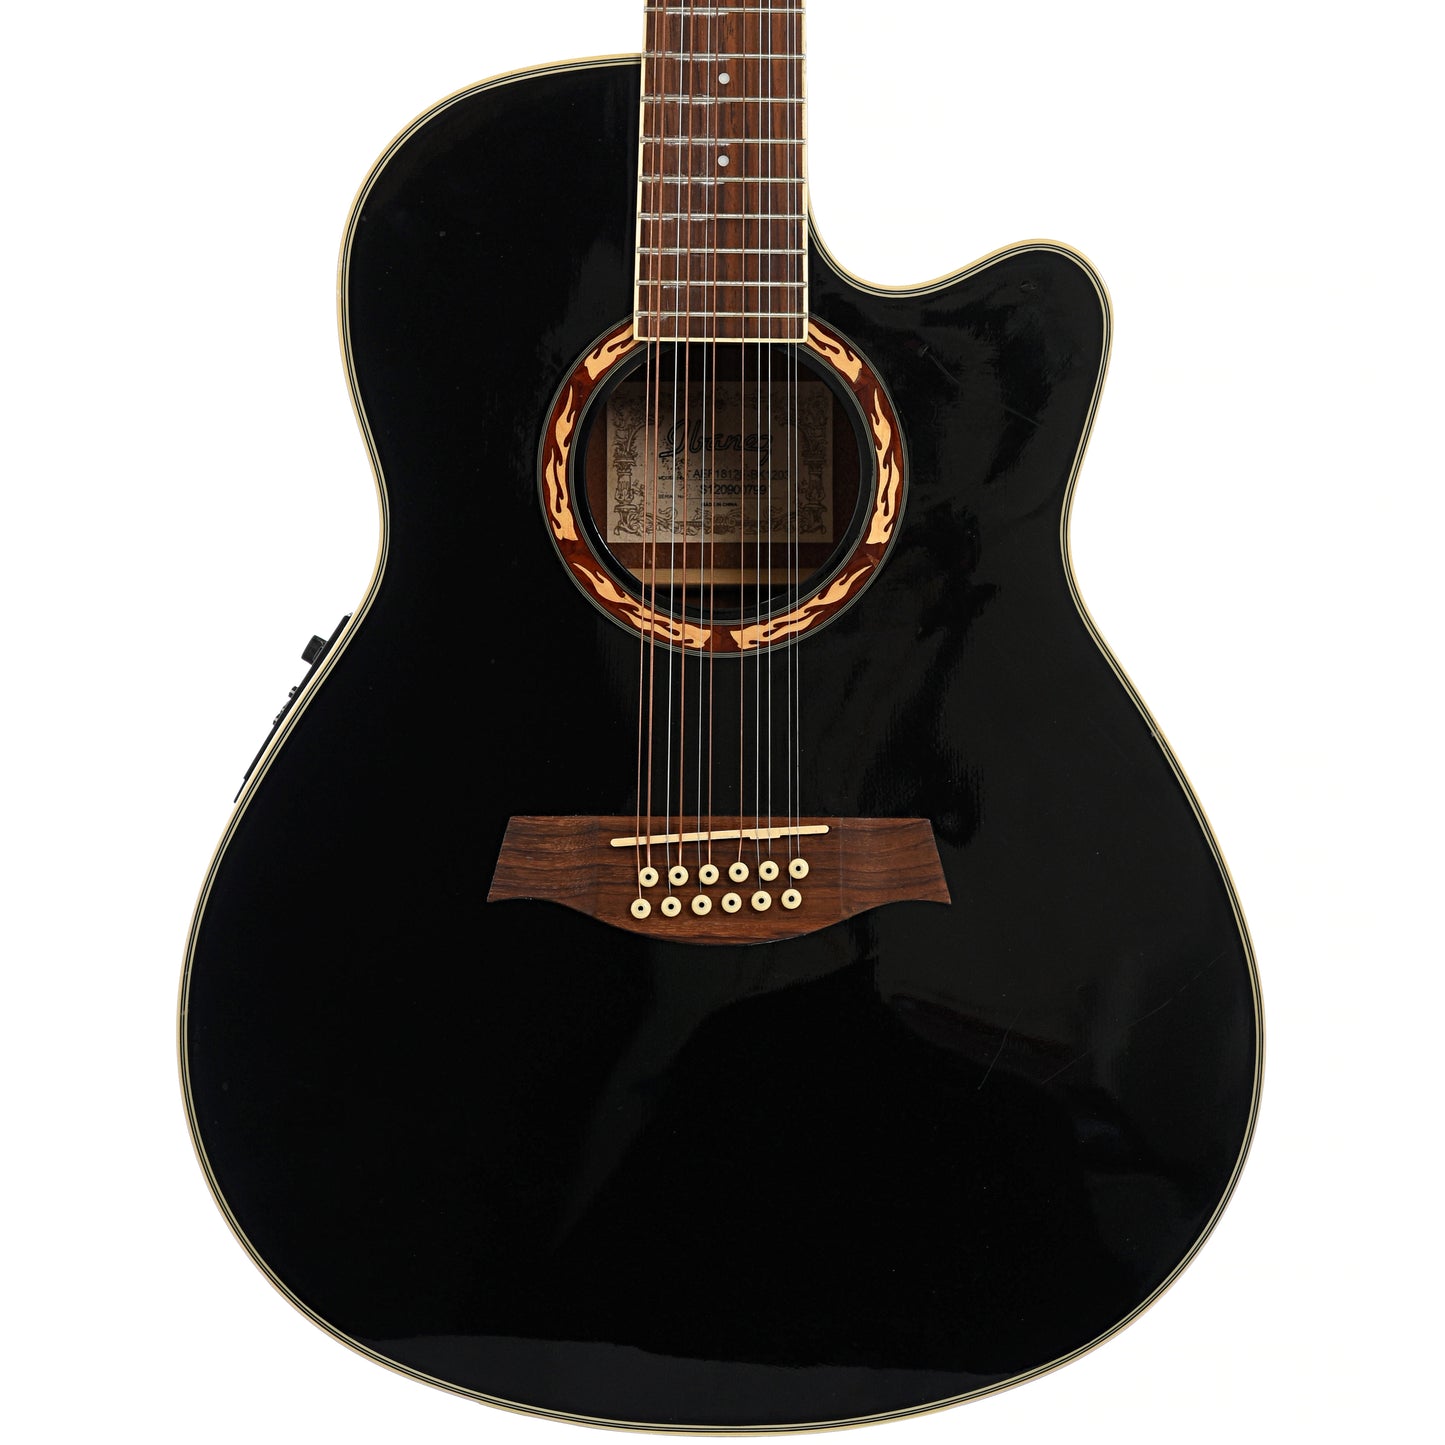 Ibanez AEF1812E-BK1202 12-String Acoustic-Electric Guitar (c.2012)